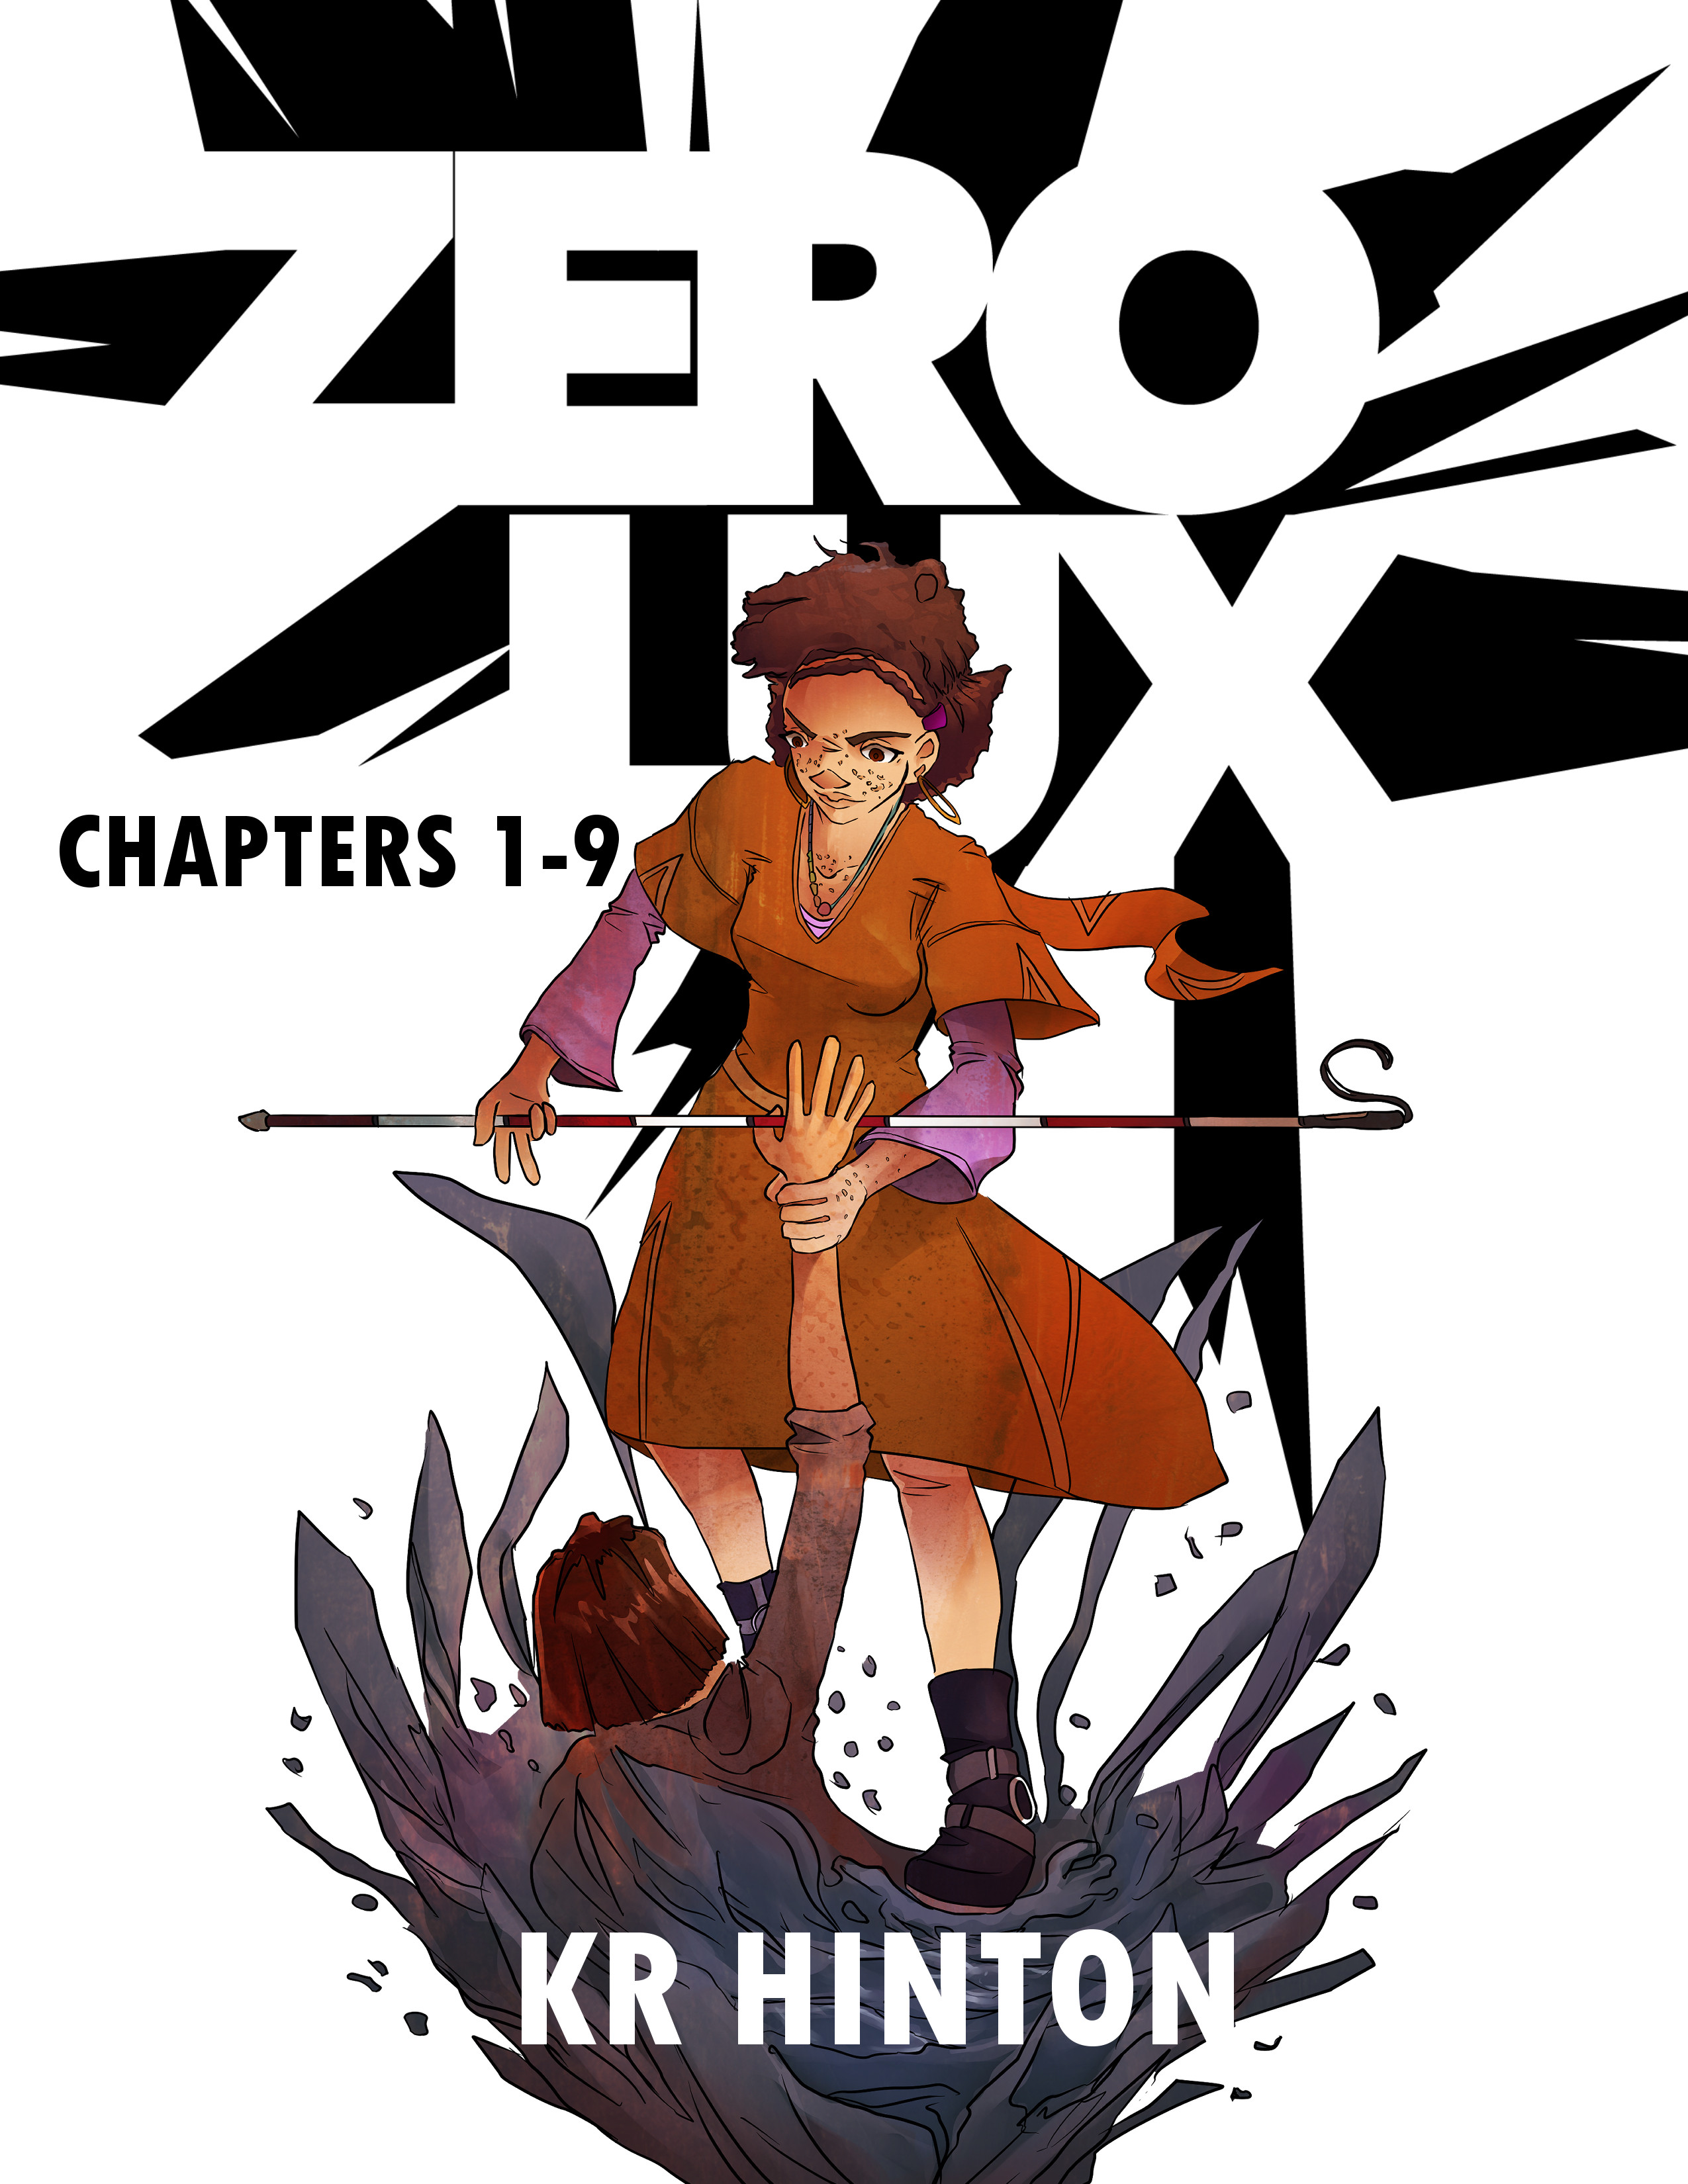 Cover for a collection of the Graphic Novel